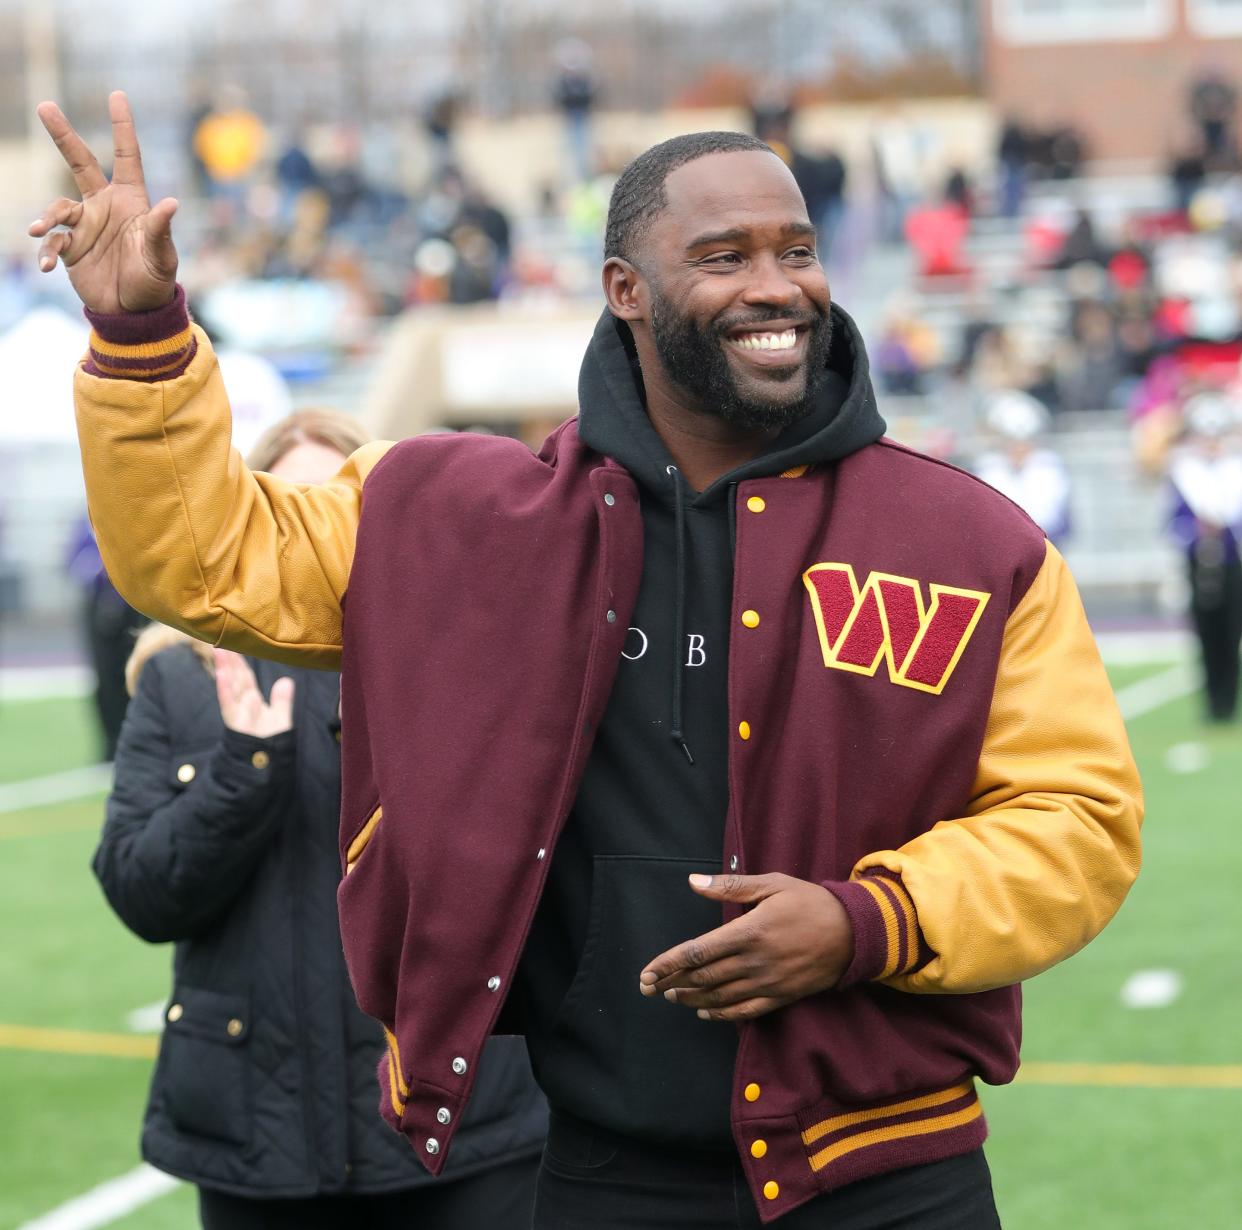 Former Mount Union wide receiver and retired NFL player Pierre Garcon waves to the crowd Saturday, Nov. 11, 2023, after being introduced during halftime of the Purple Raiders' game against Baldwin Wallace. Garcon was inducted as a member of the Class of 2023 of Mount Union's M Club Hall of Fame.